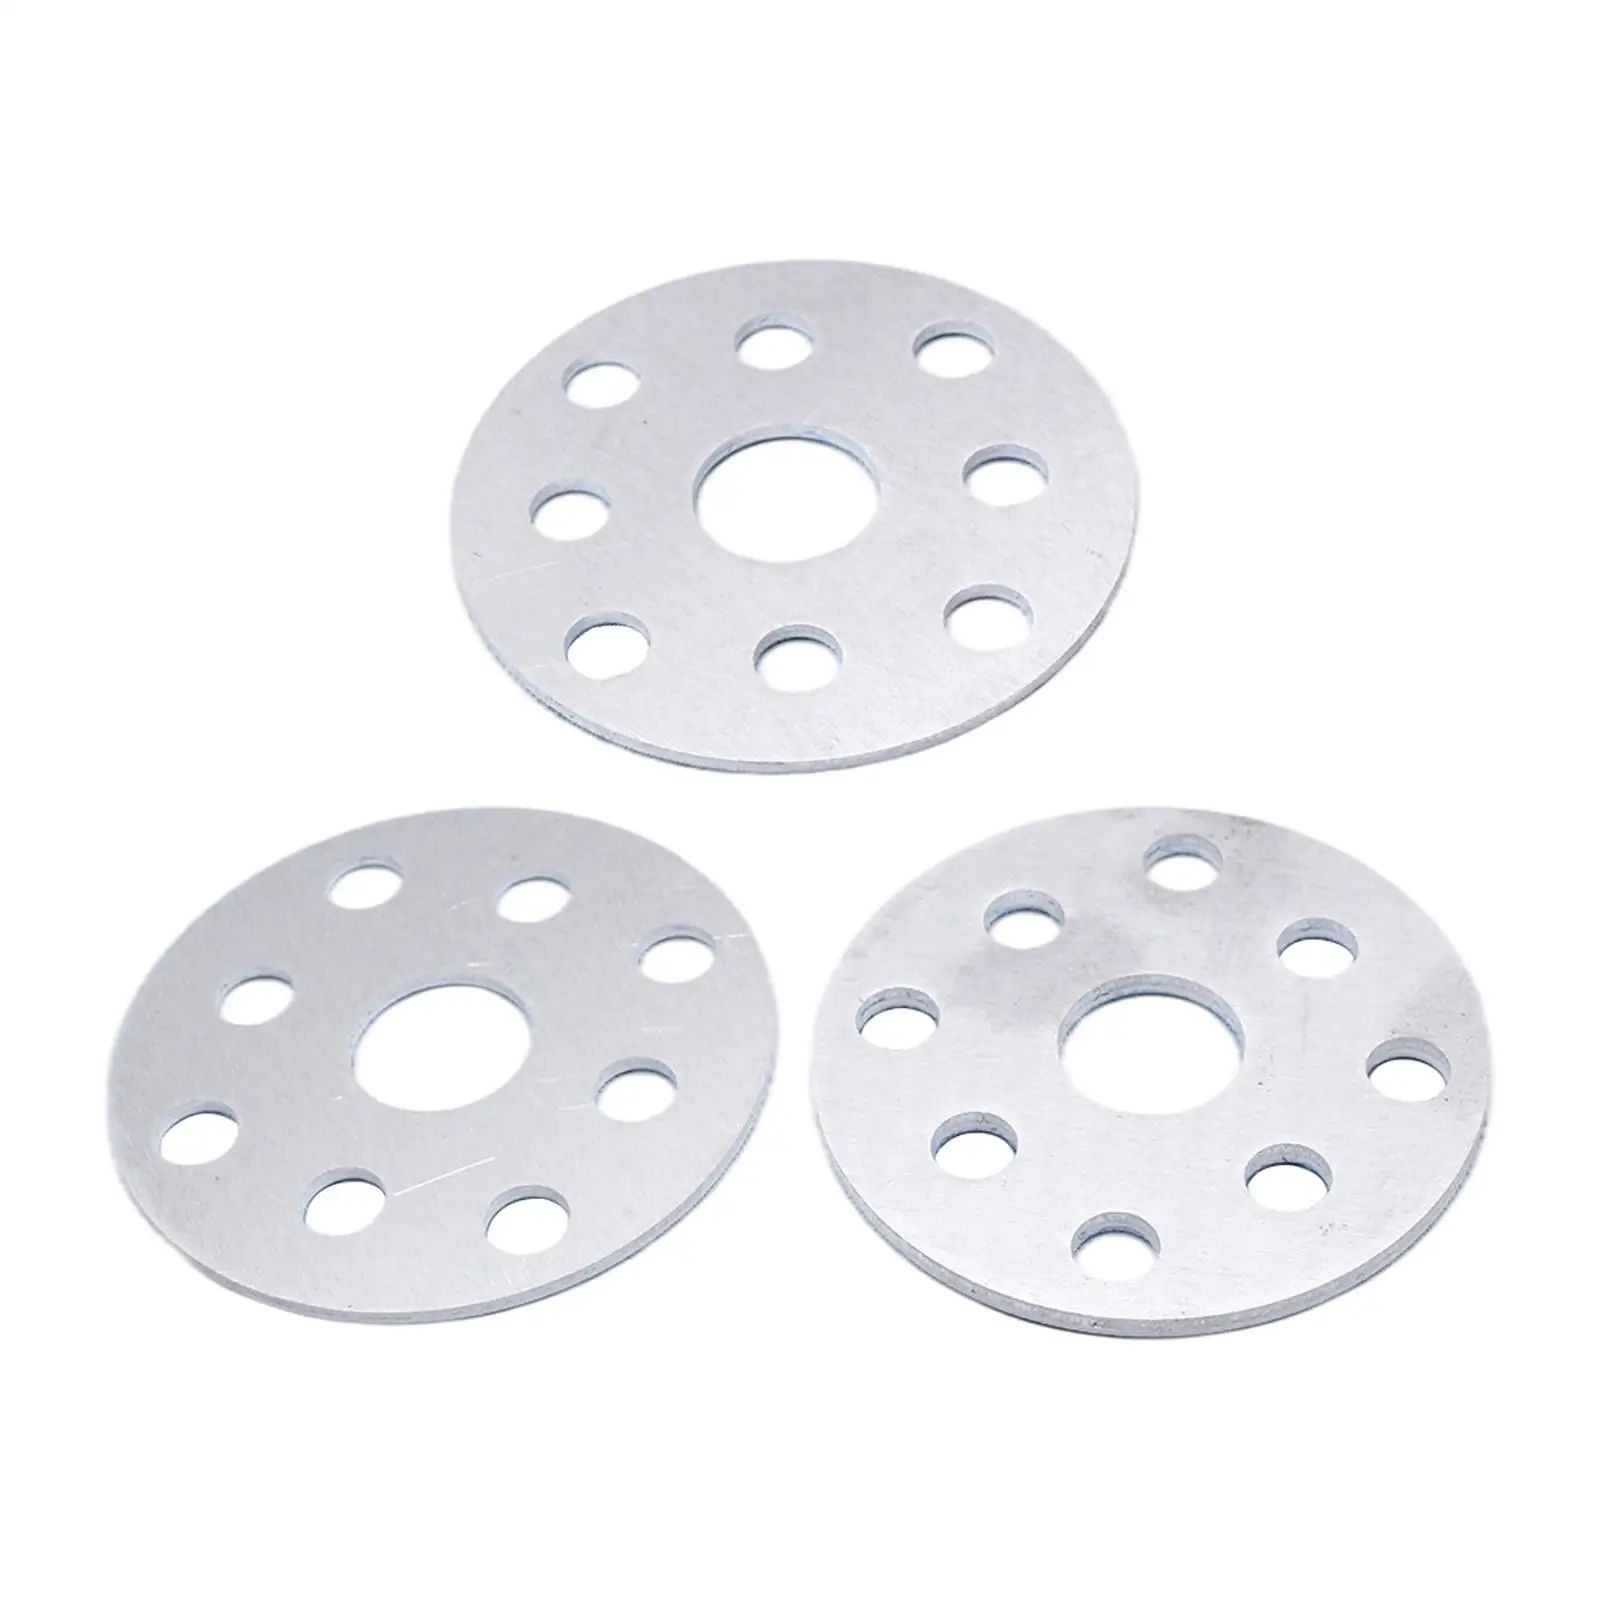 3 Pieces Water Pump Spacer Car Supplies Aluminum Alloy Metal Pulley Shim  02 350 427 454 Pulley Fan Accessories/ Moulding